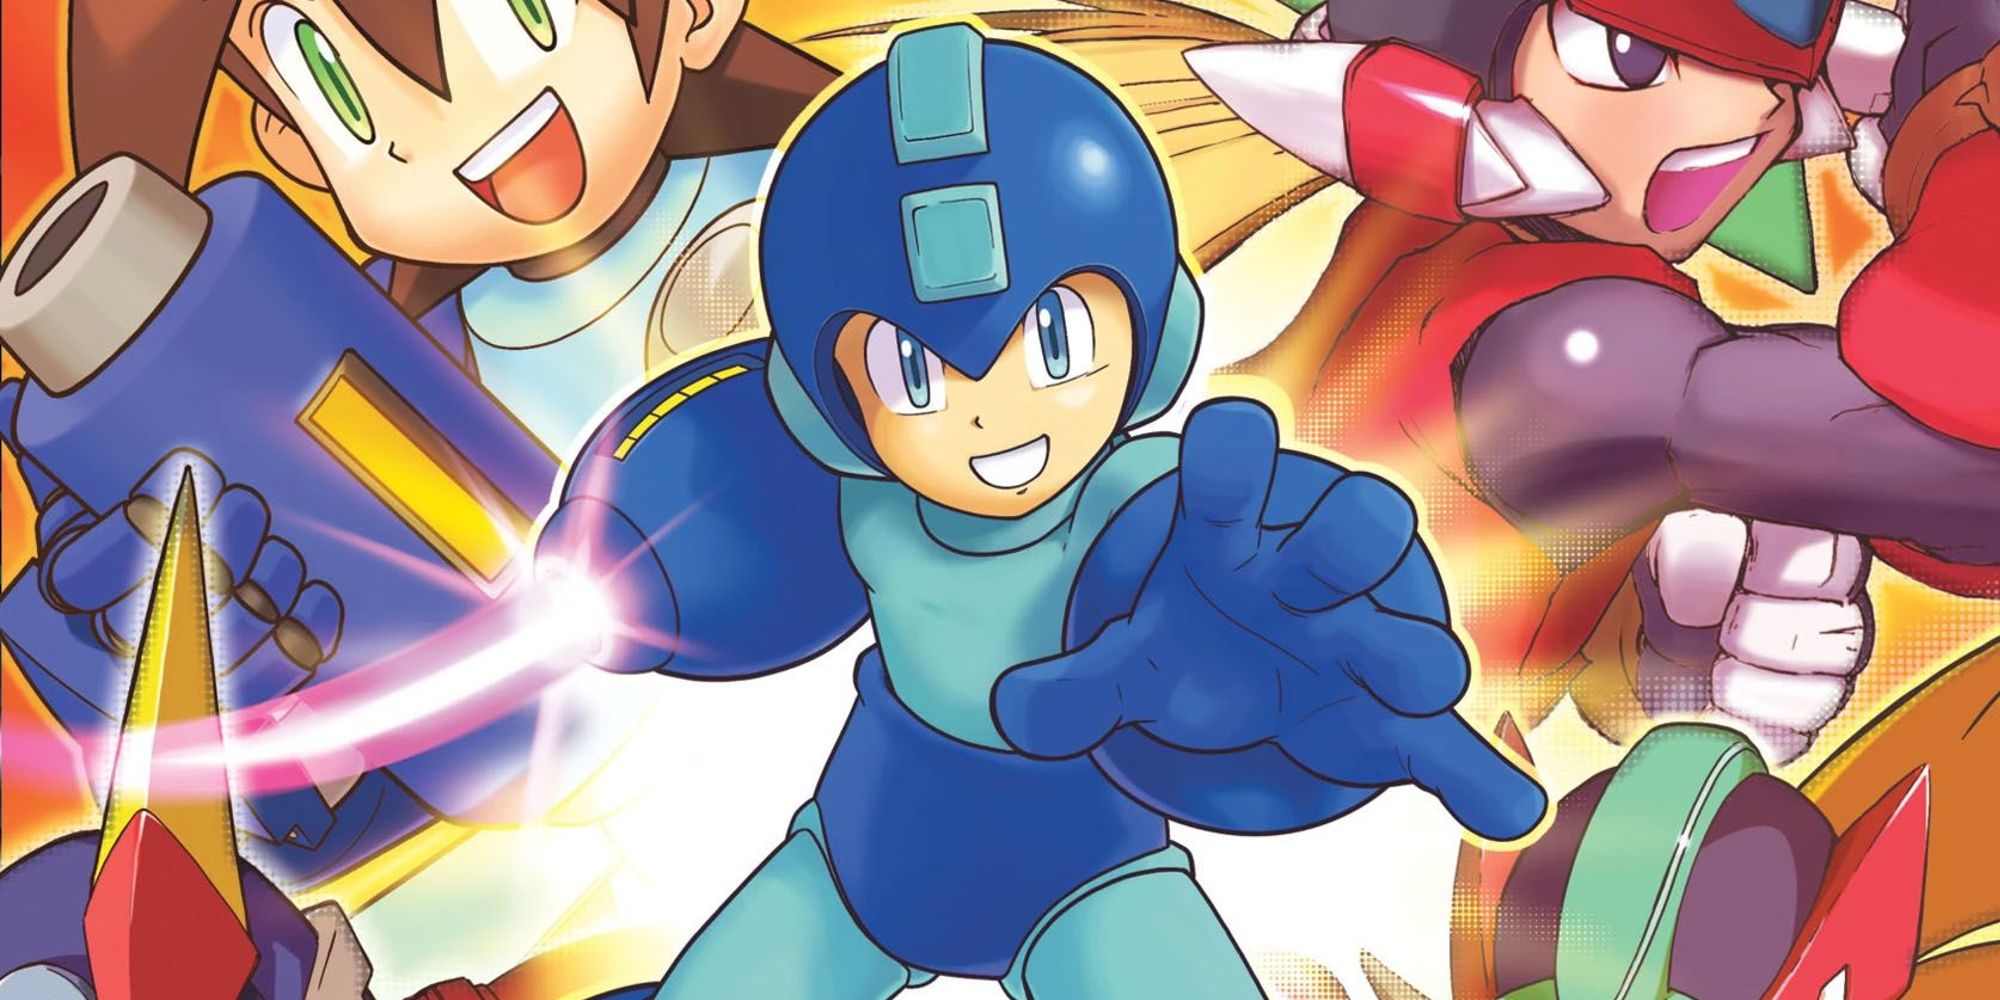 Rockman wielding a Mega Buster in the game's key artwork